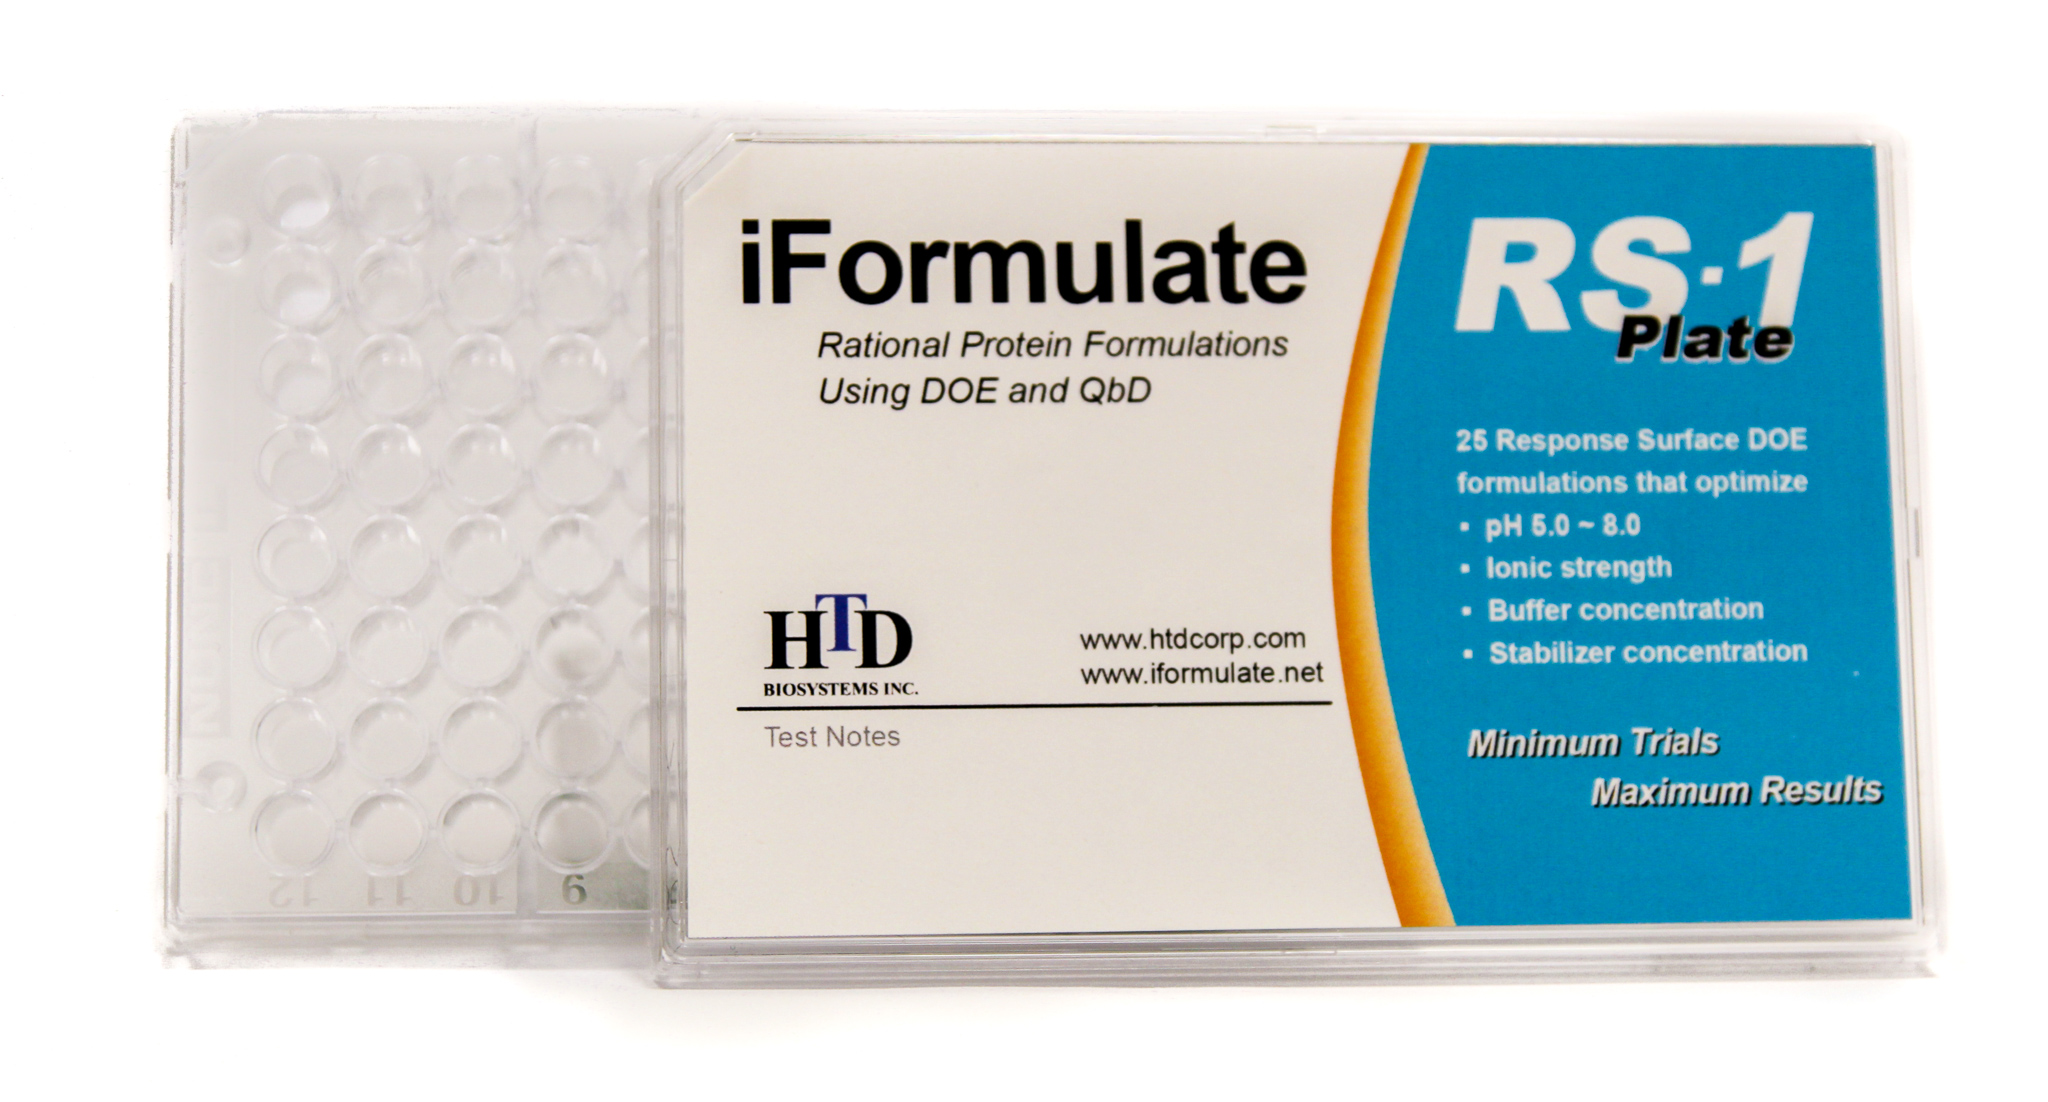 iFormulate RS-1 Plate